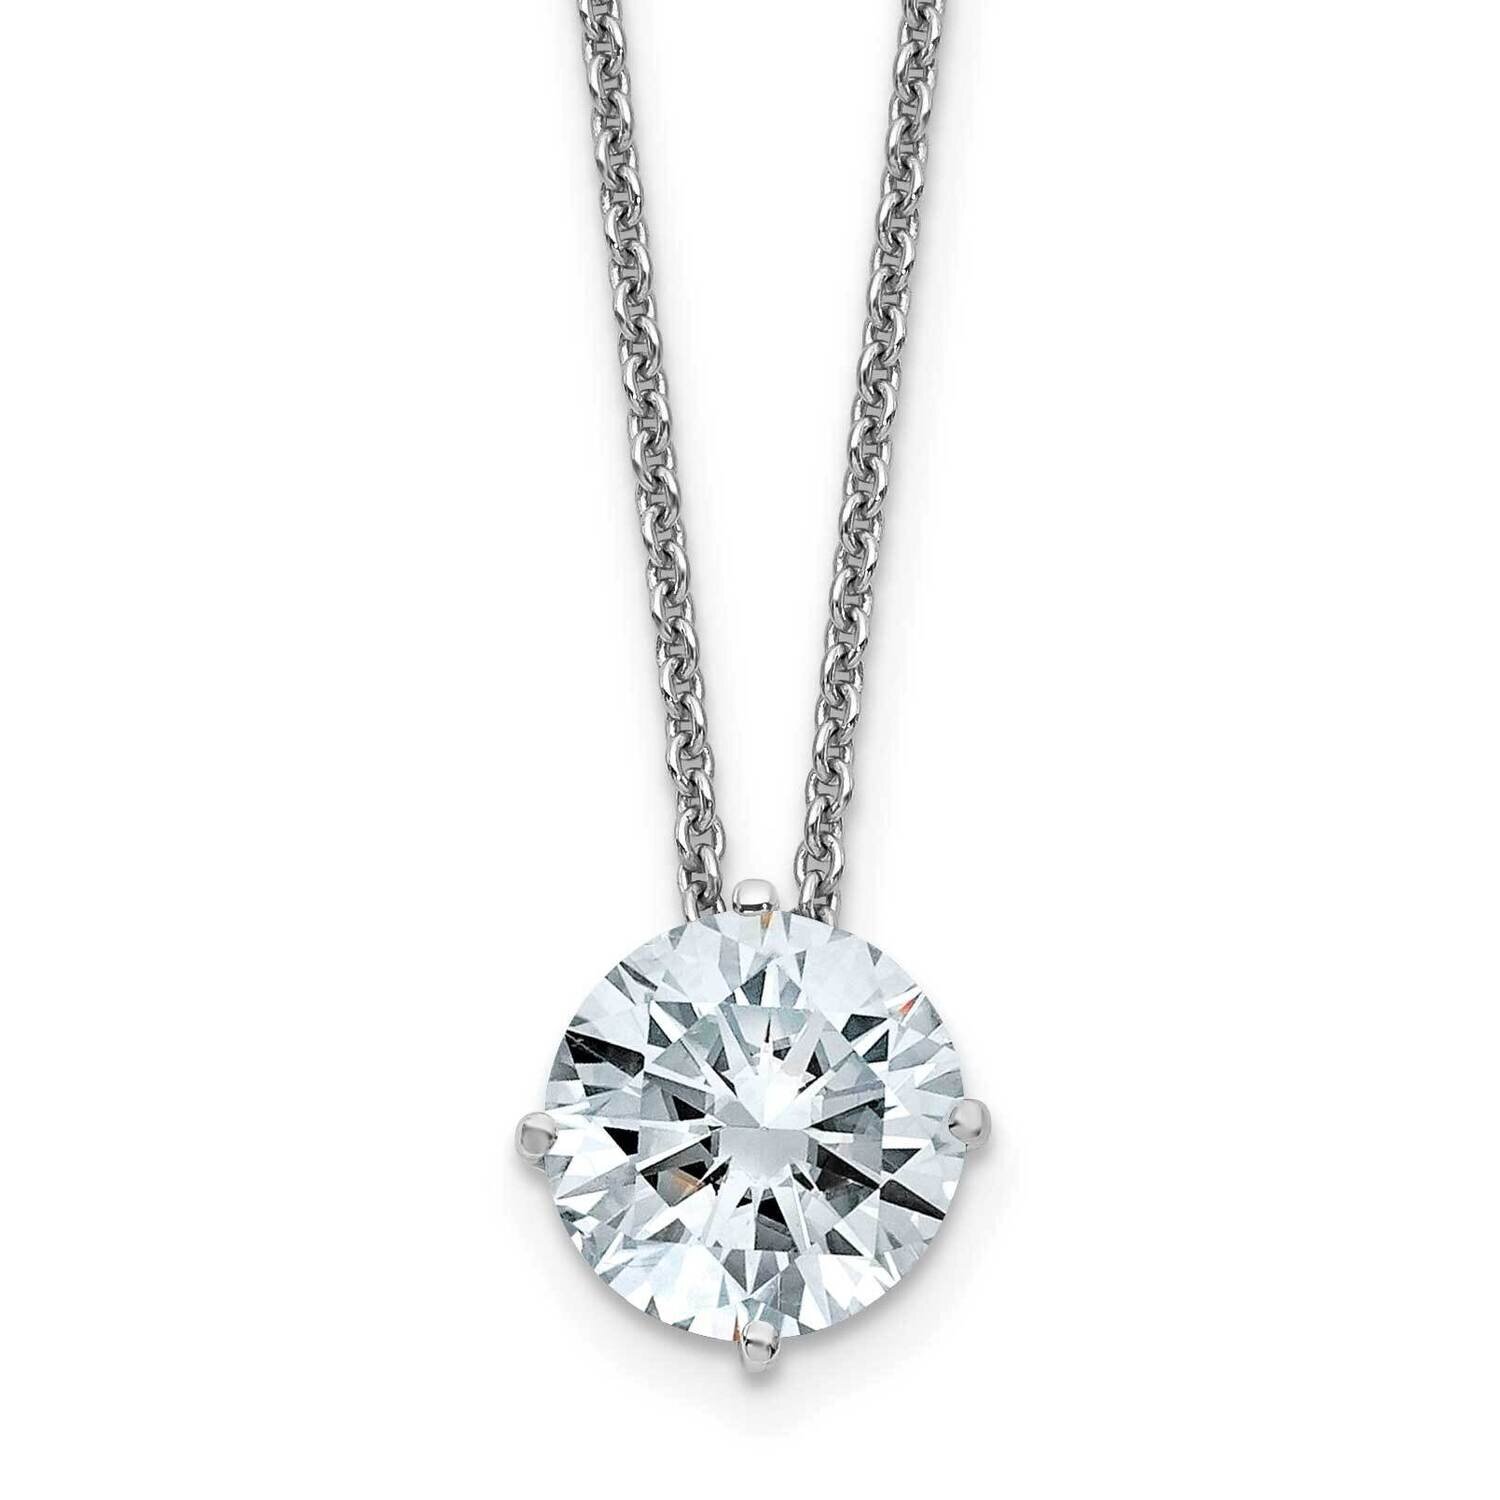 2ct. 8.0mm Round D E F Pure Light Moissanite Solitaire Necklace 14k White Gold WG113-25MP